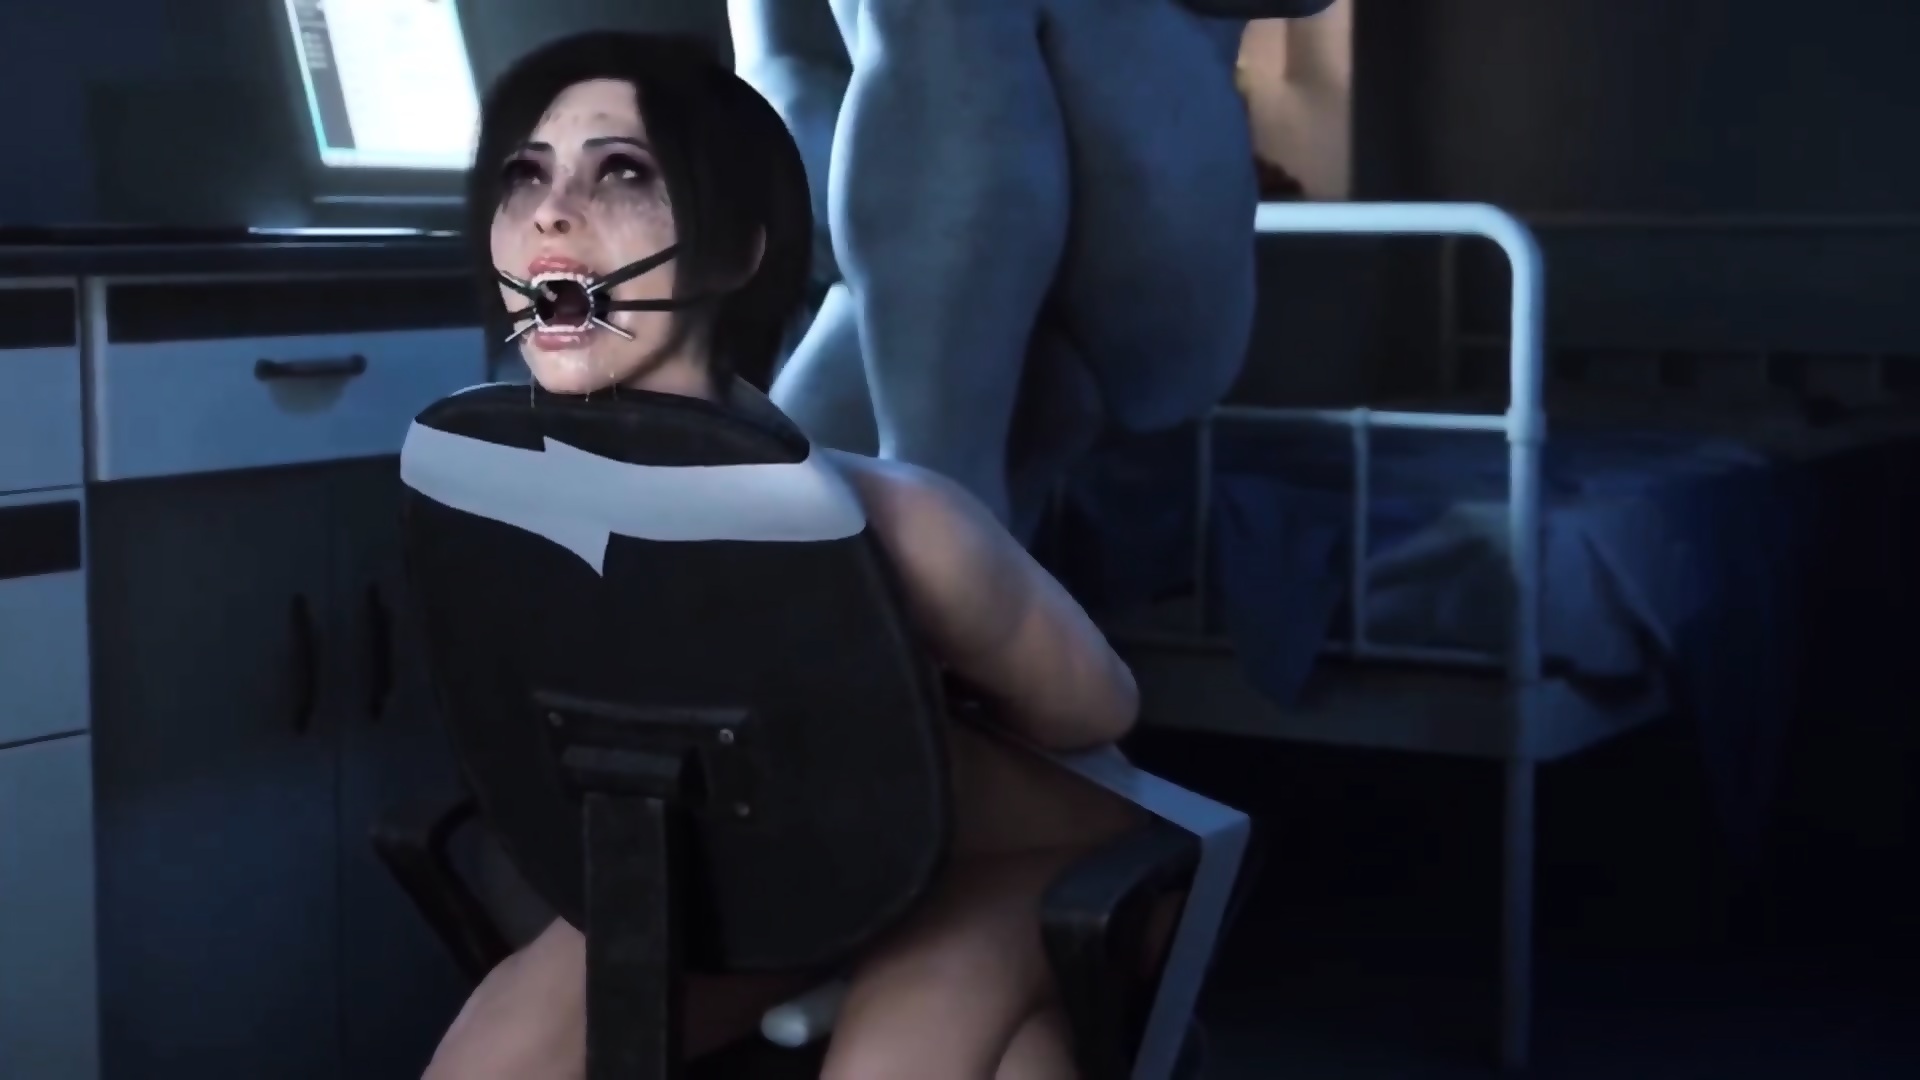 Ada wong trapped porn